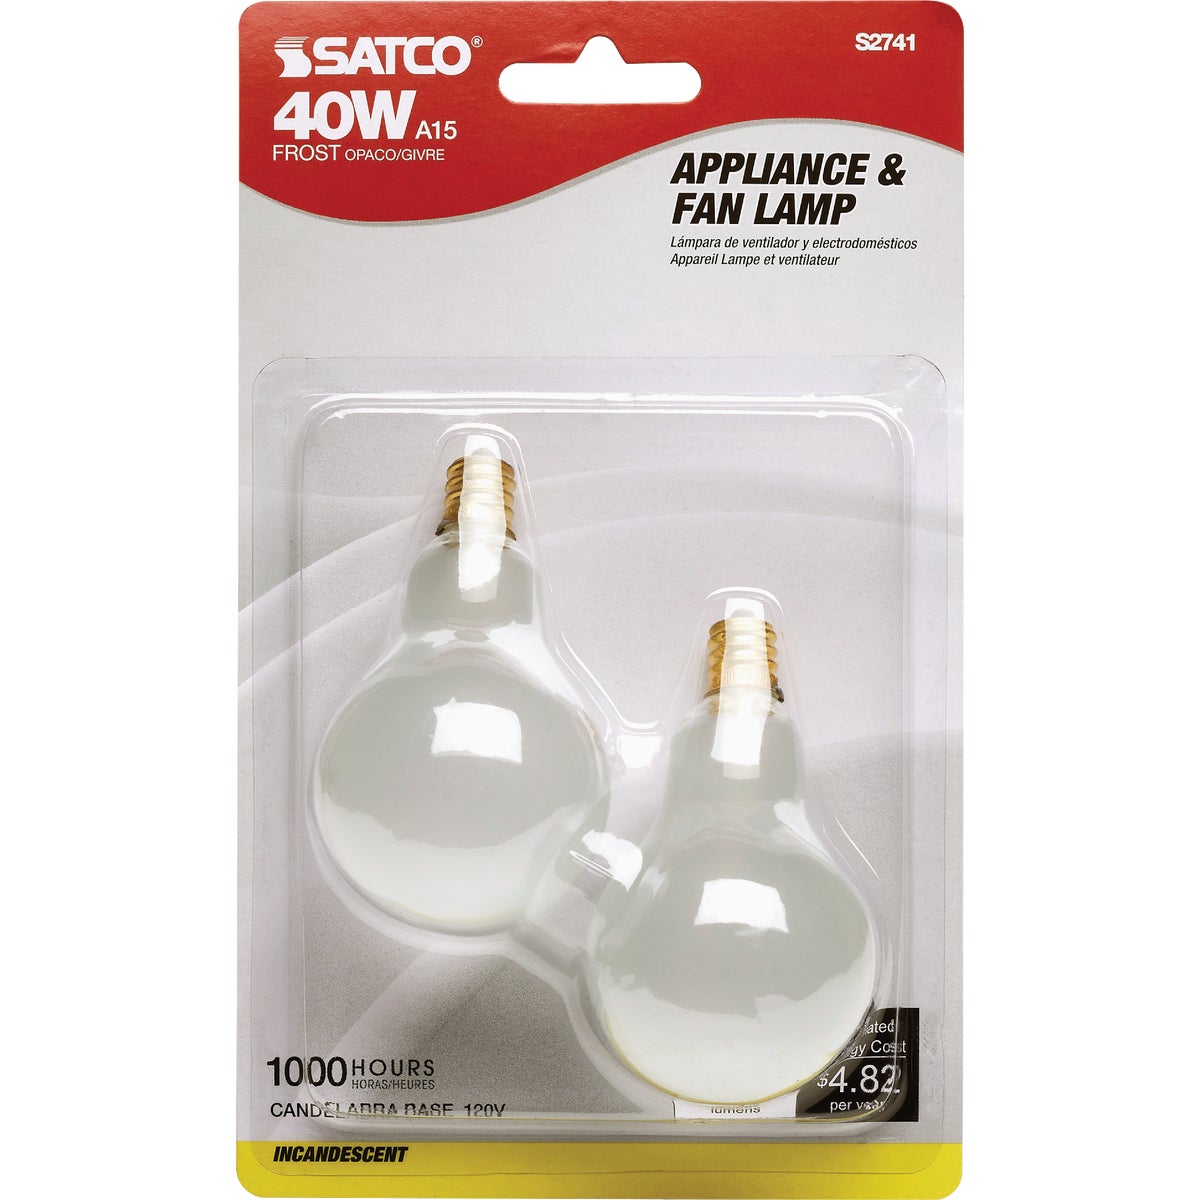 Satco 40W Frosted Soft White Candelabra A15 Incandescent Ceiling Fan Light Bulb (2-Pack)